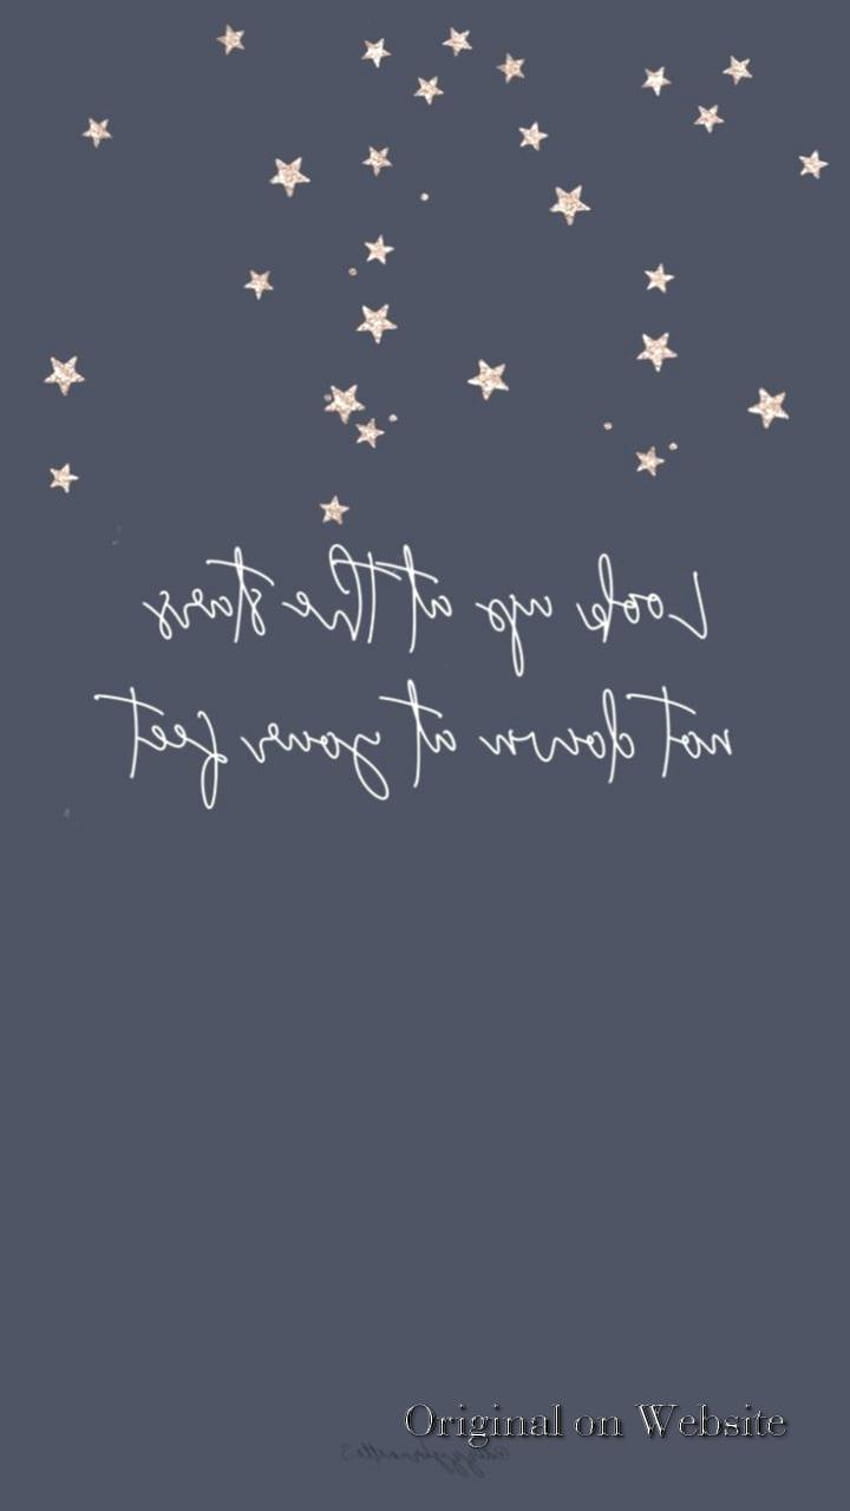 Stars on the top of the image, cute phone backgrounds, grey background - Inspirational, motivational, quotes